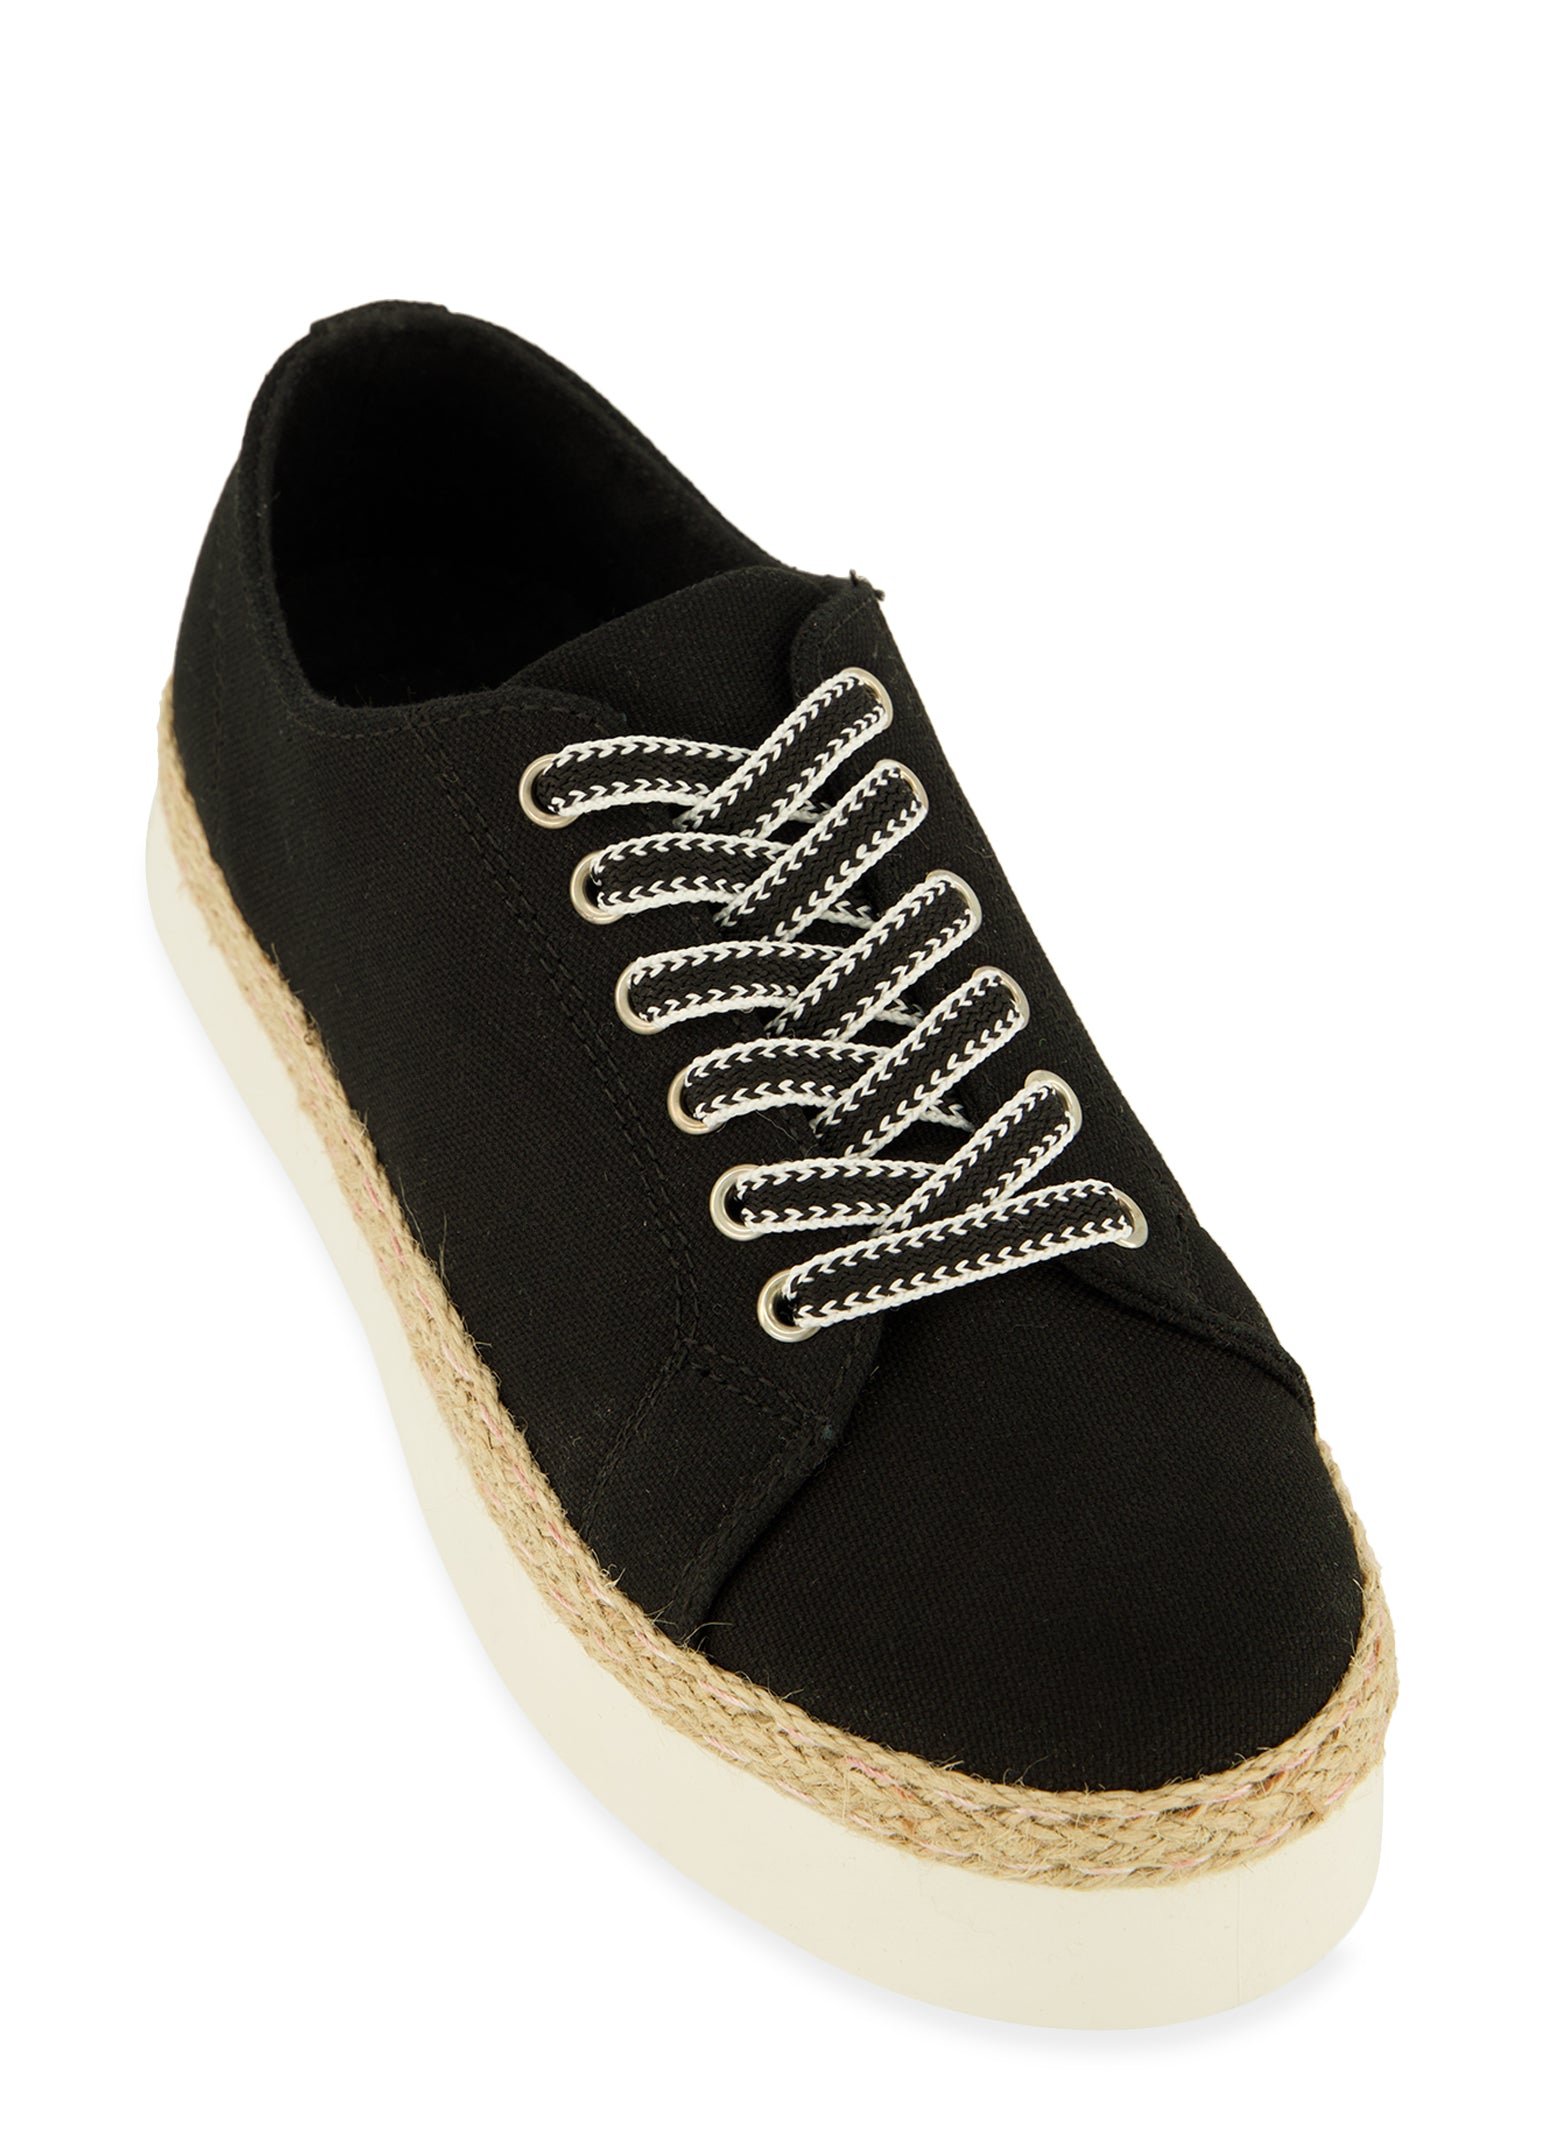 Womens Lace Up Espadrille Platform Sneakers,